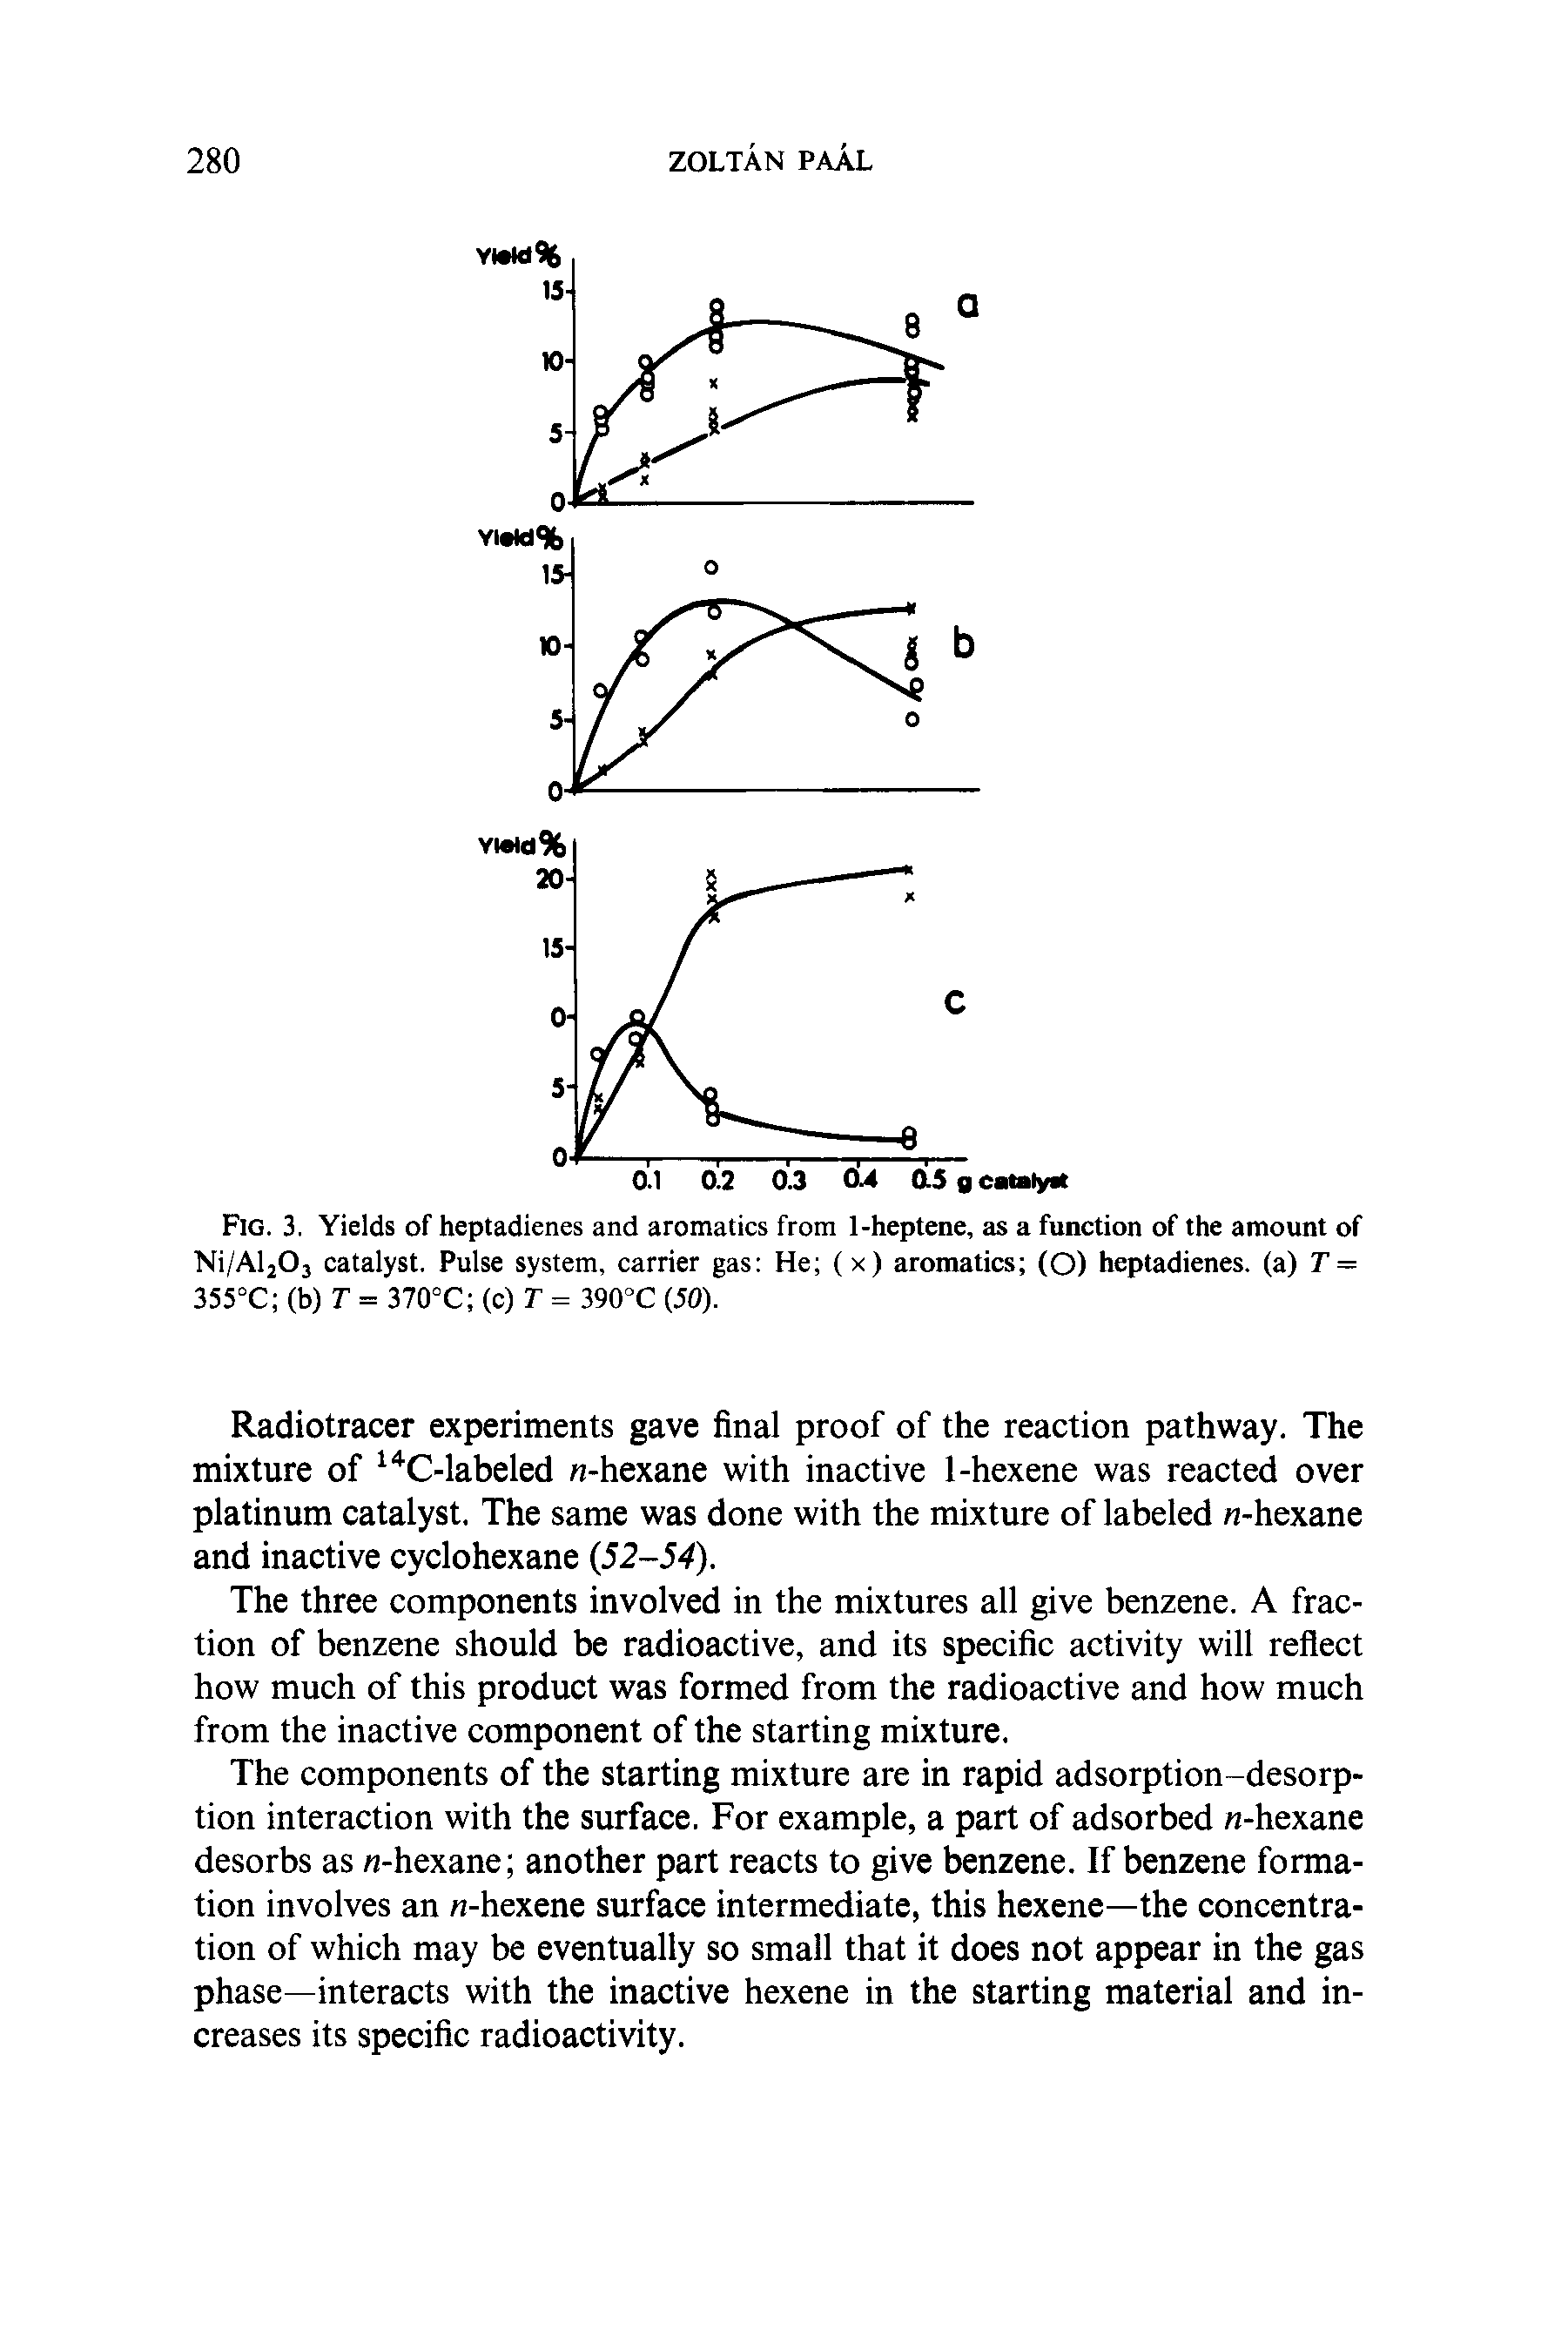 Fig. 3. Yields of heptadienes and aromatics from 1-heptene, as a function of the amount of Ni/AljOj catalyst. Pulse system, carrier gas He (x) aromatics (O) heptadienes. (a) T = 355 C (b) T = 370°C (c) T = 390 C (50).